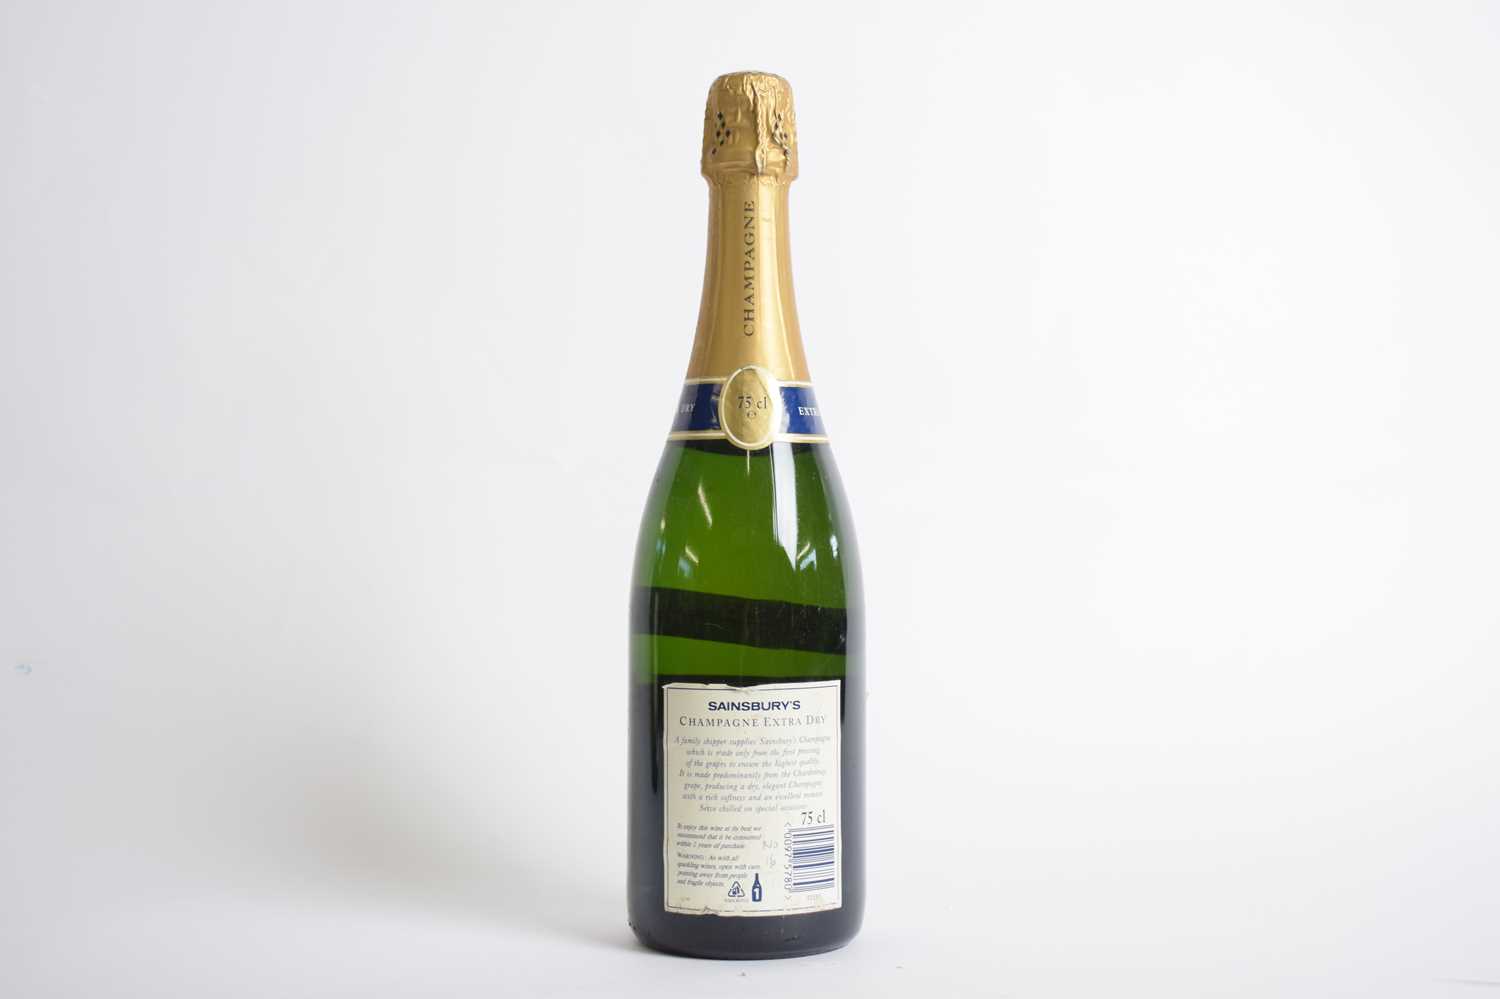 One bottle Sainsbury's Champagne Premier Cru, 75cl - Image 2 of 3